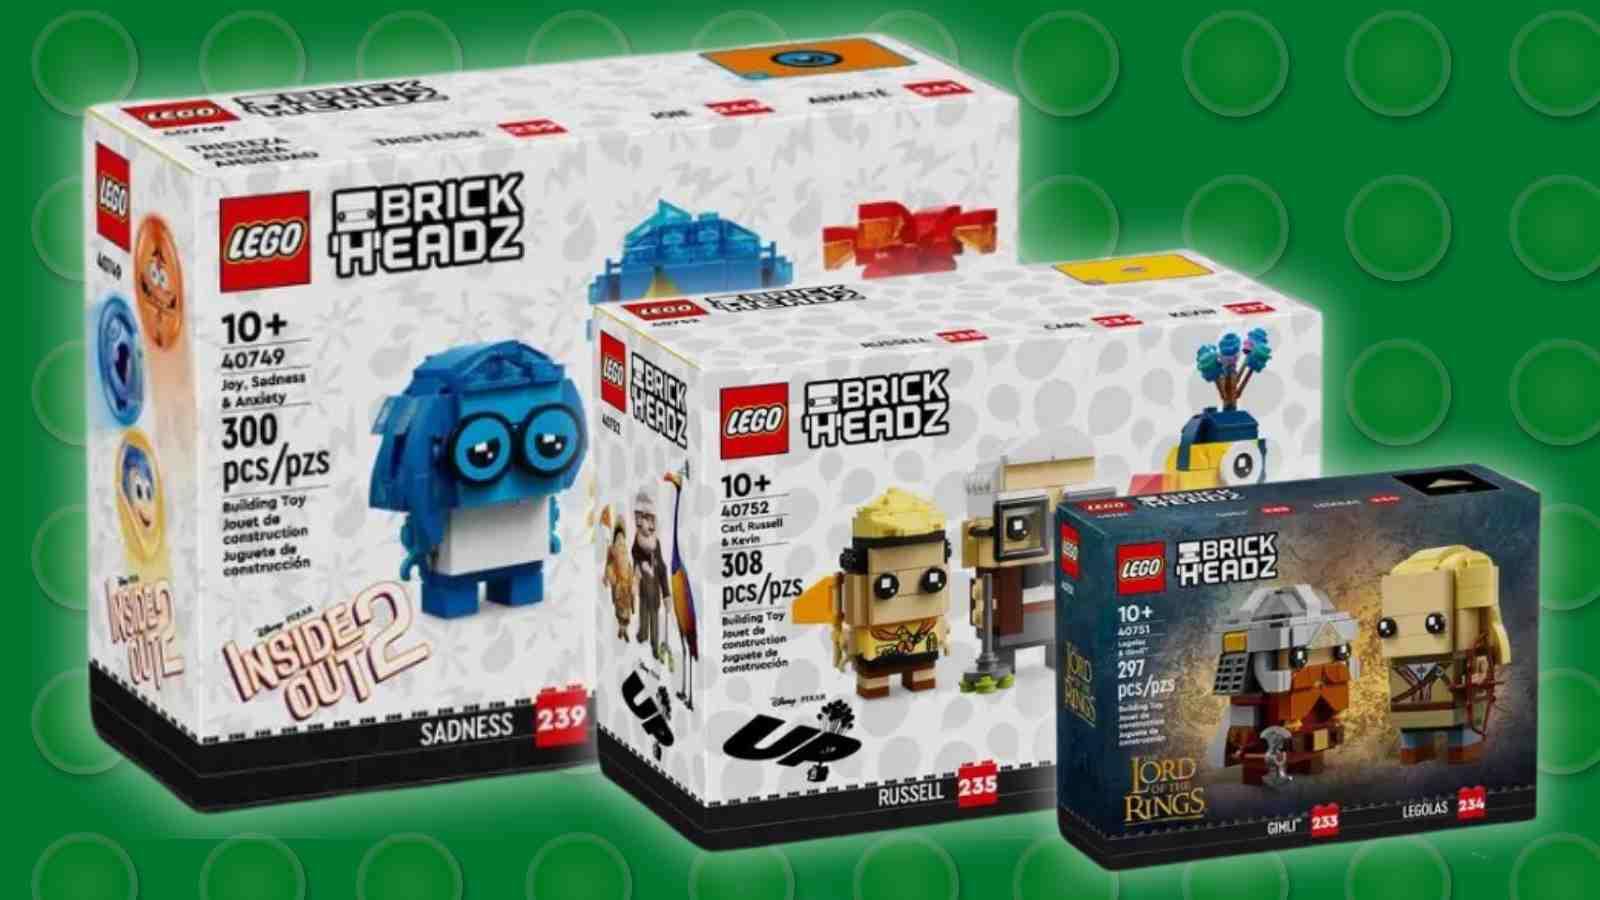 Three of the four new LEGO BrickHeadz sets coming in summer